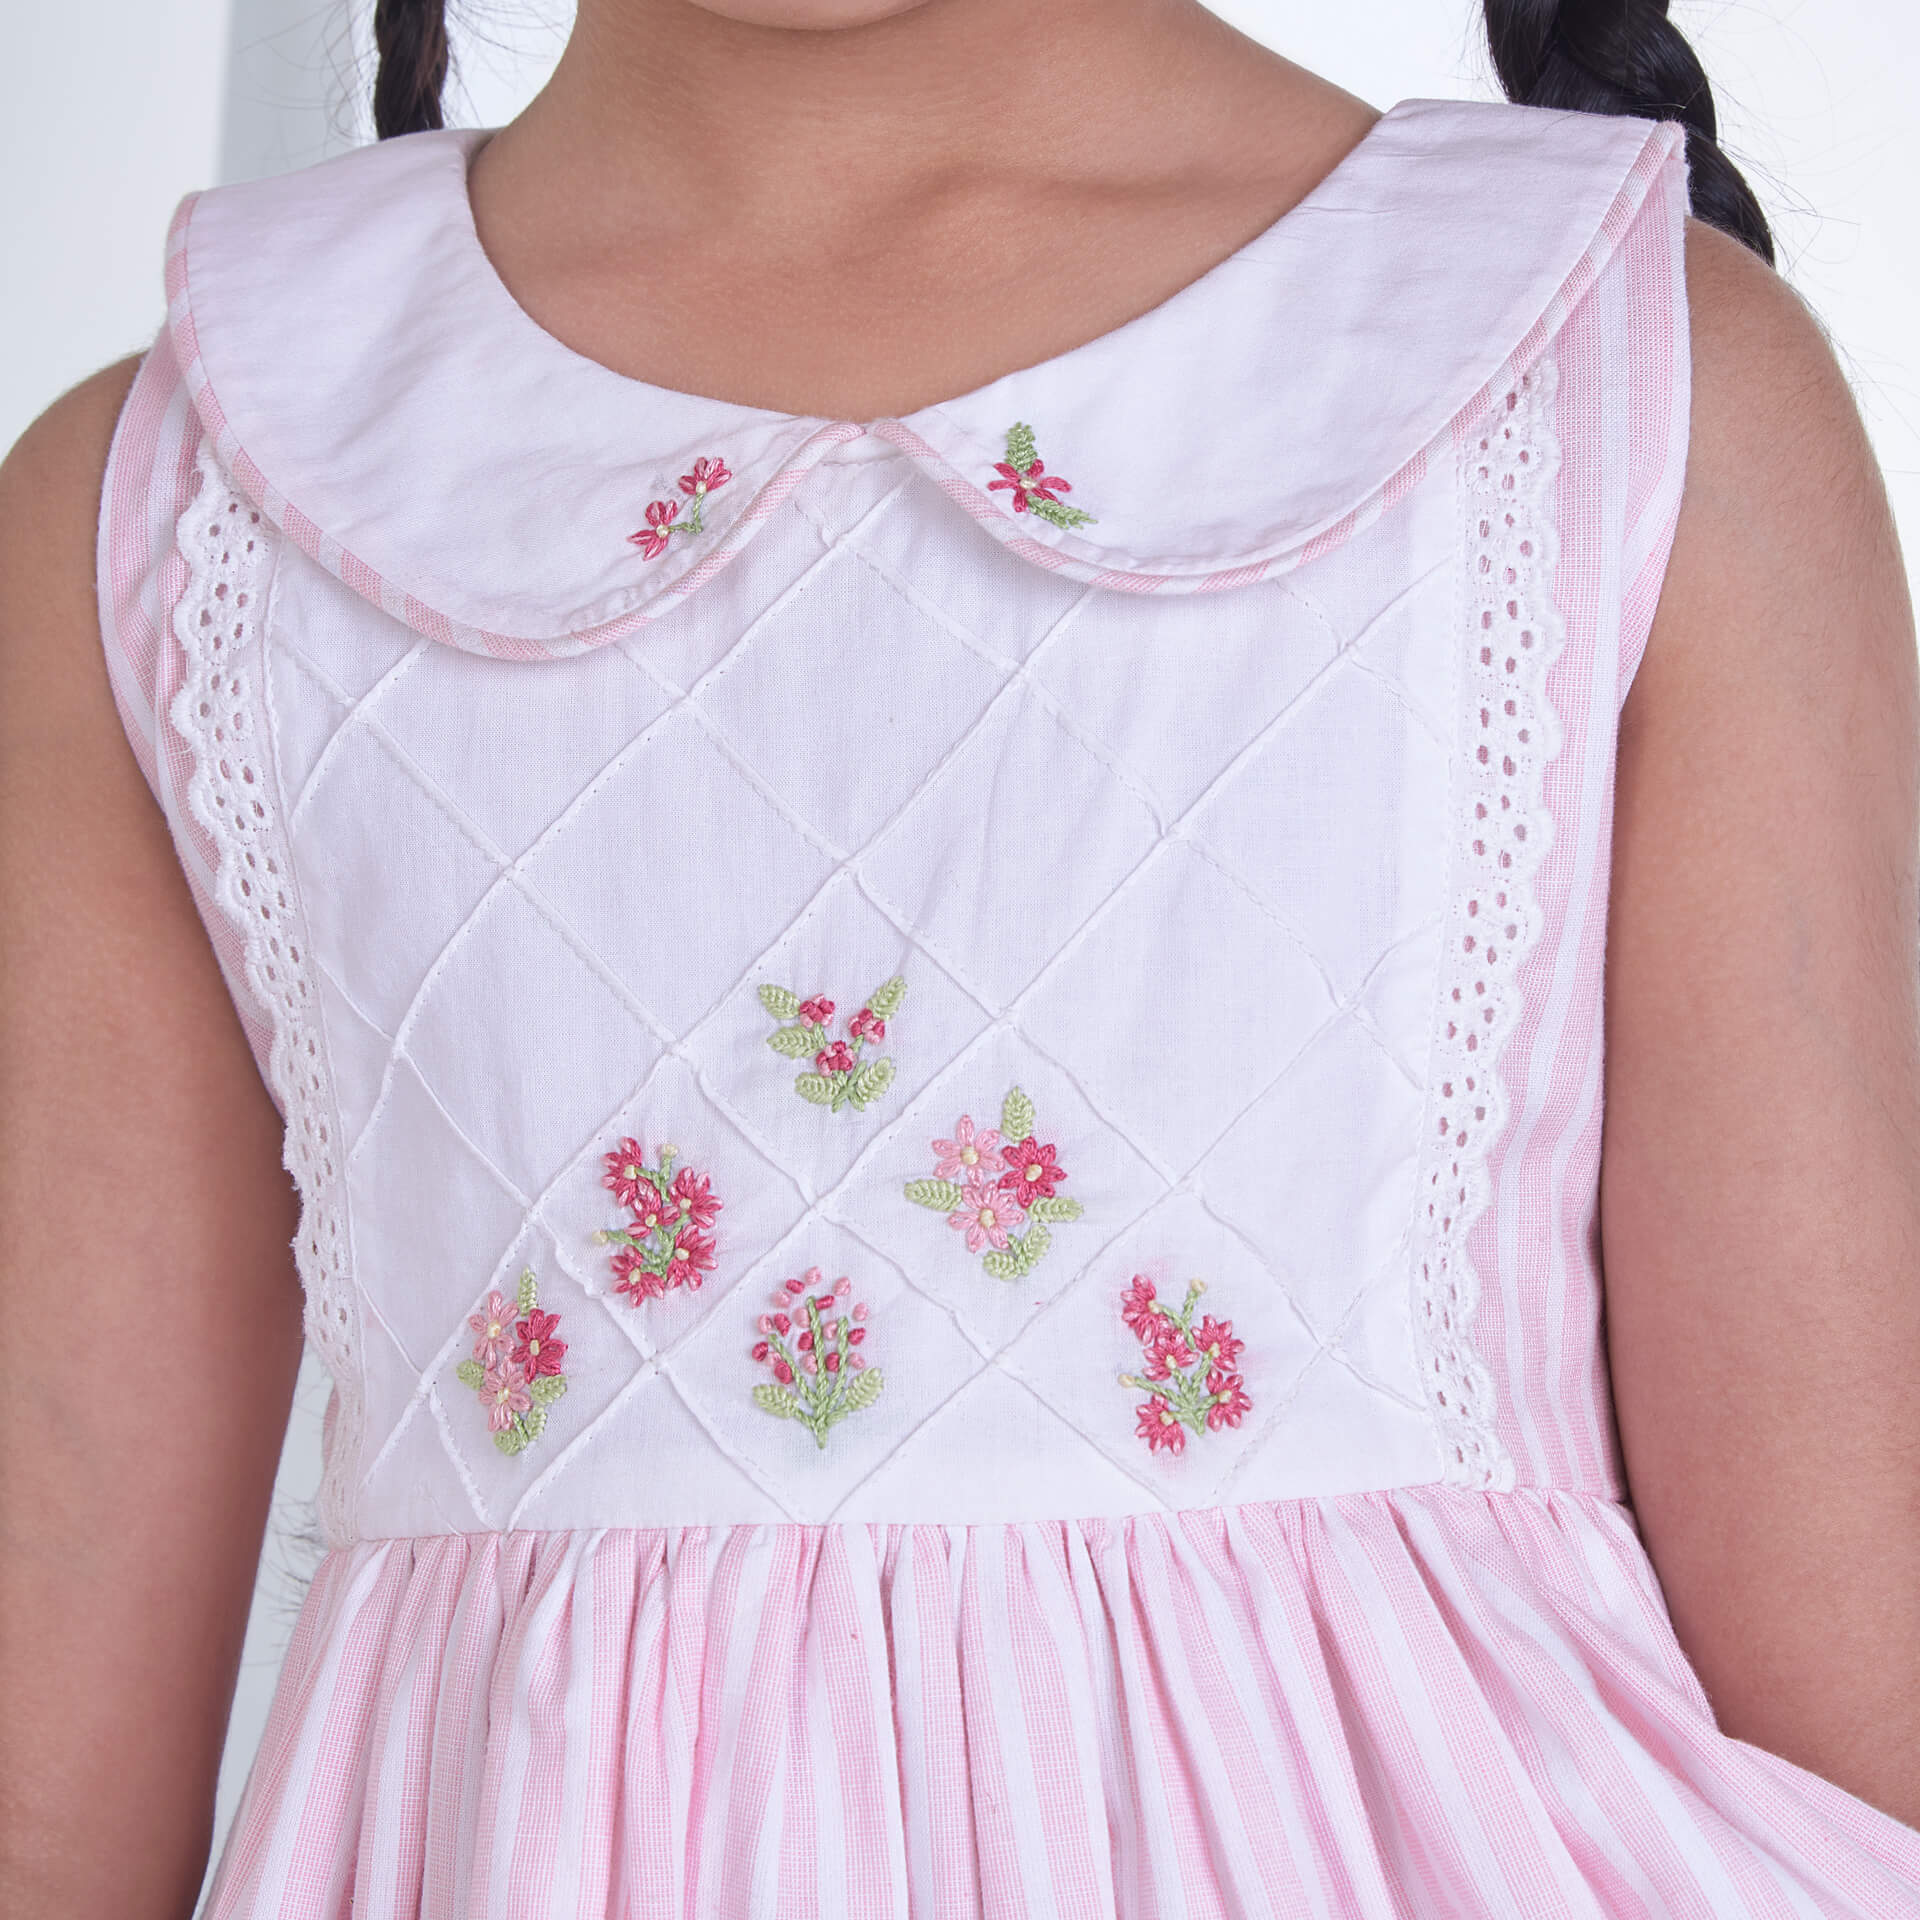 Closeup of the embroidery on a pink striped collared dress